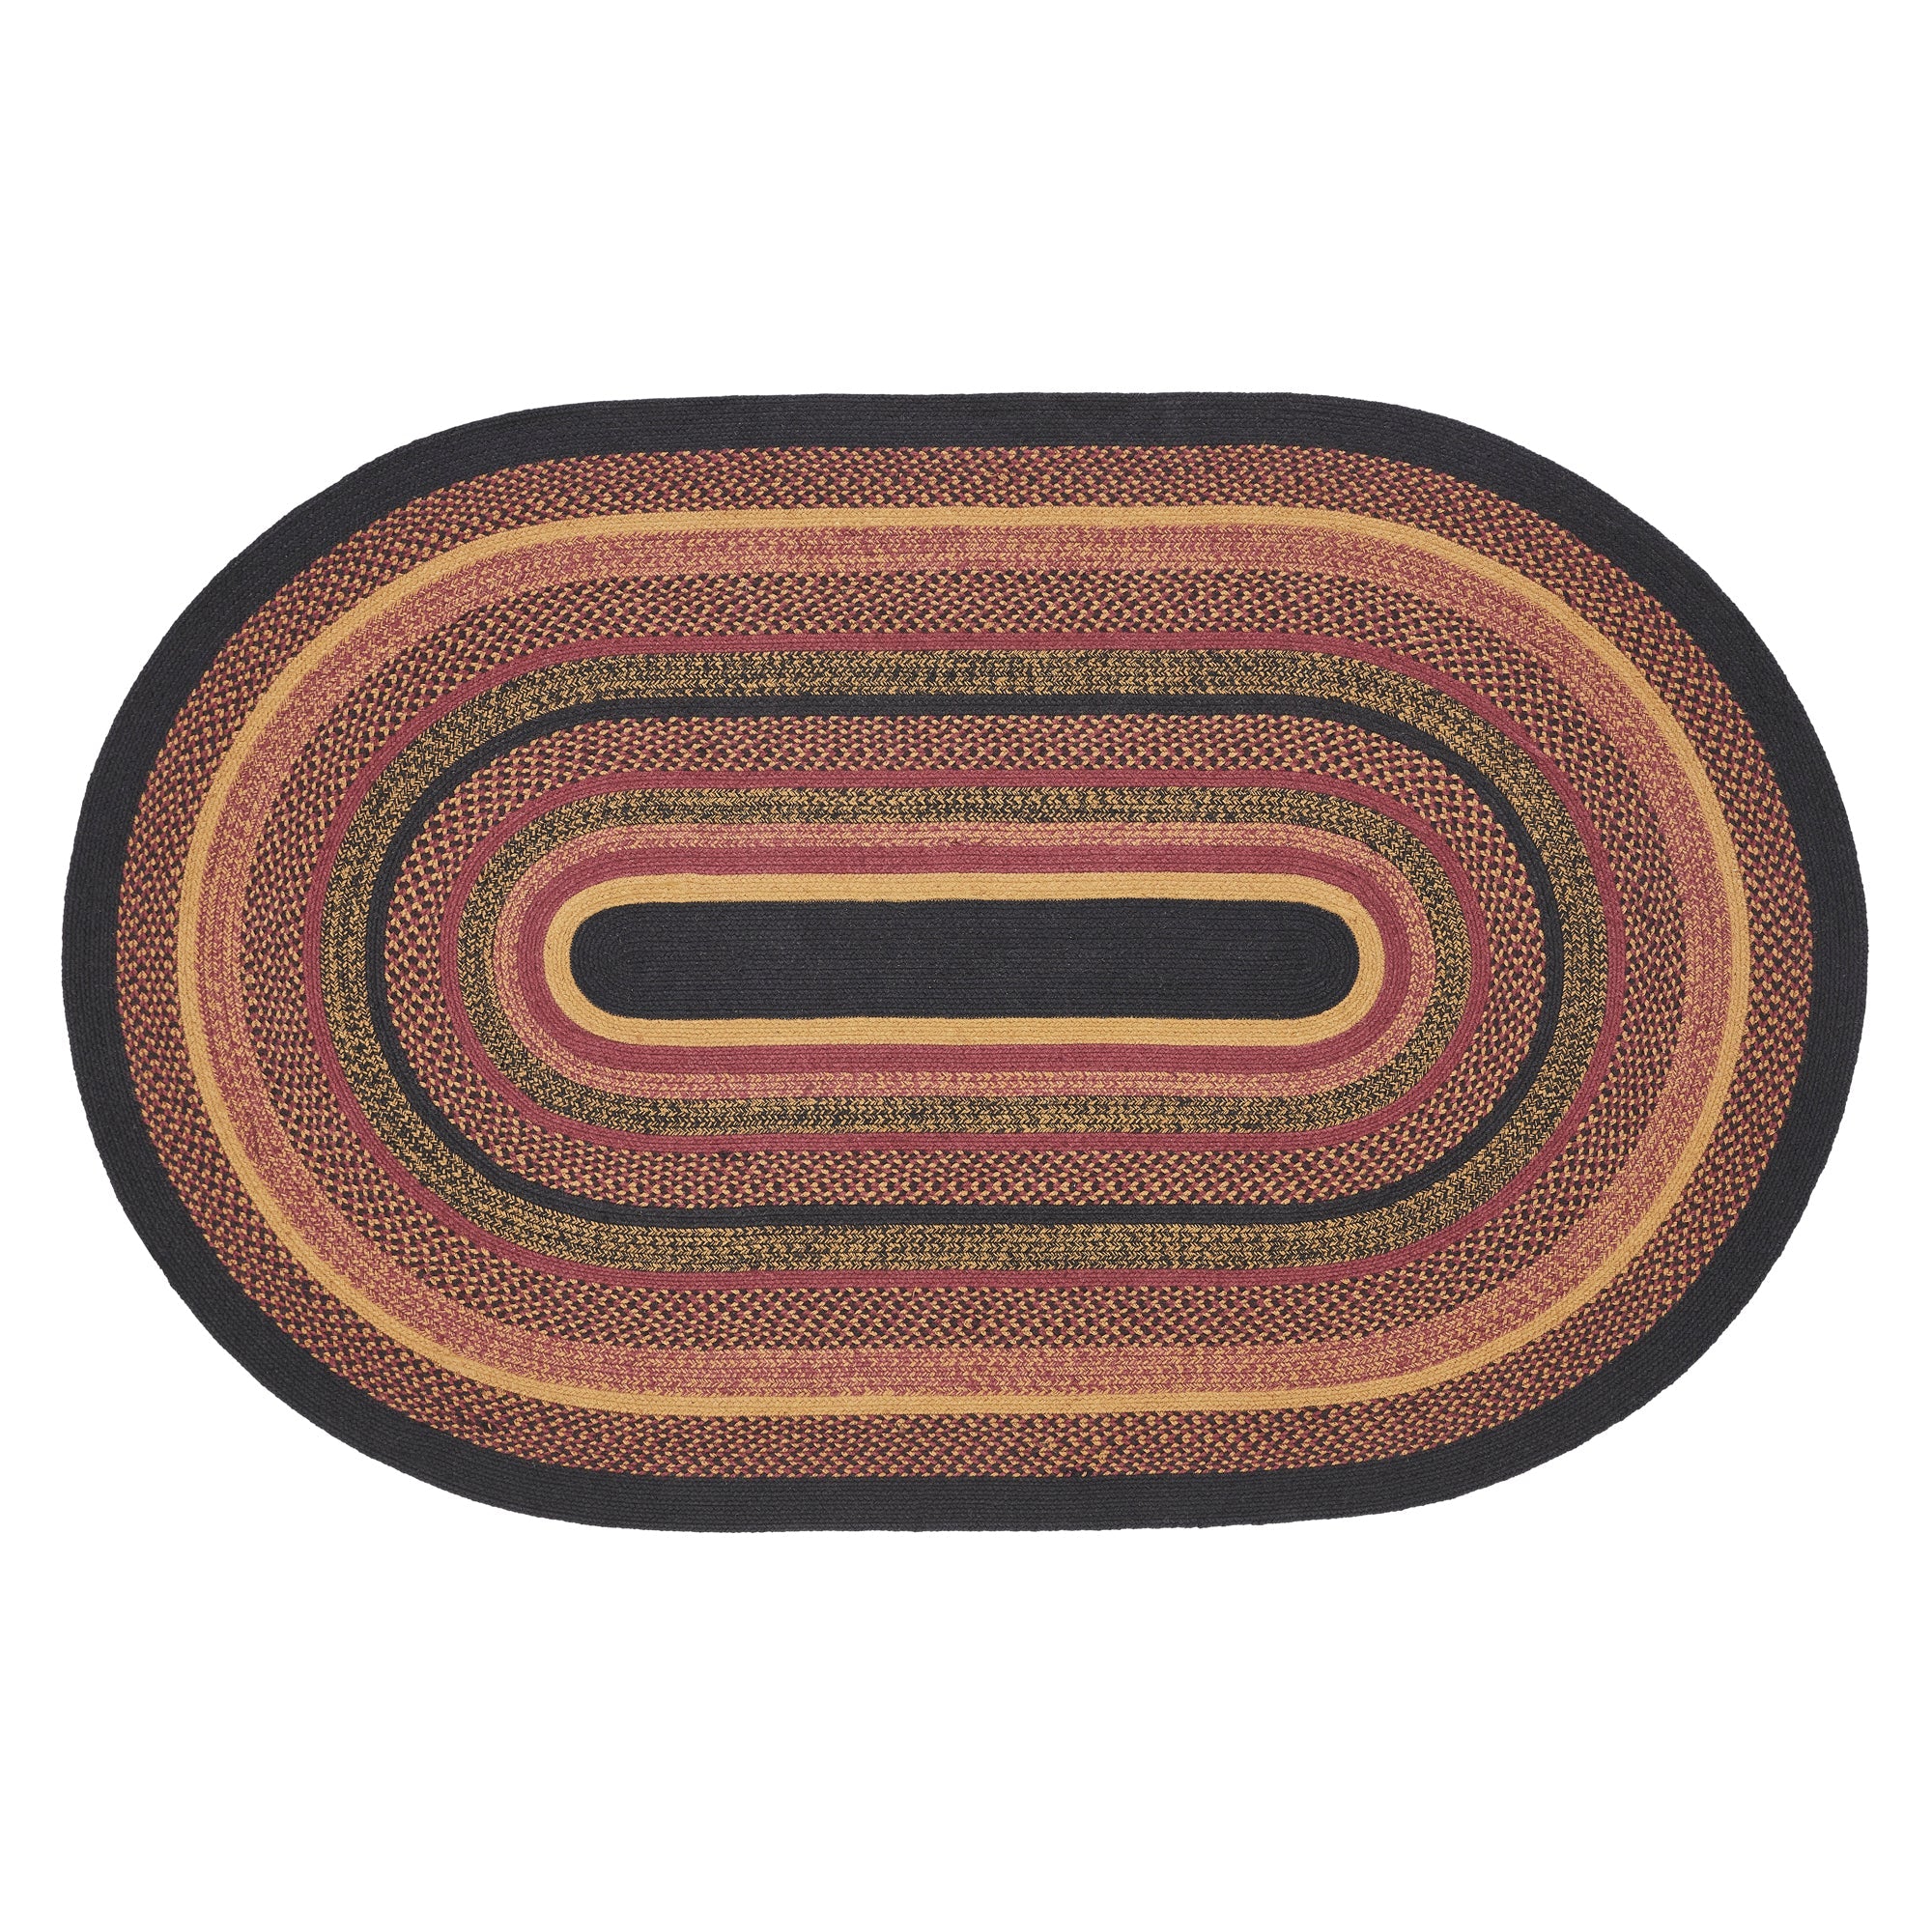 Heritage Farms Jute Braided Rug Oval with Rug Pad 5'x8' VHC Brands